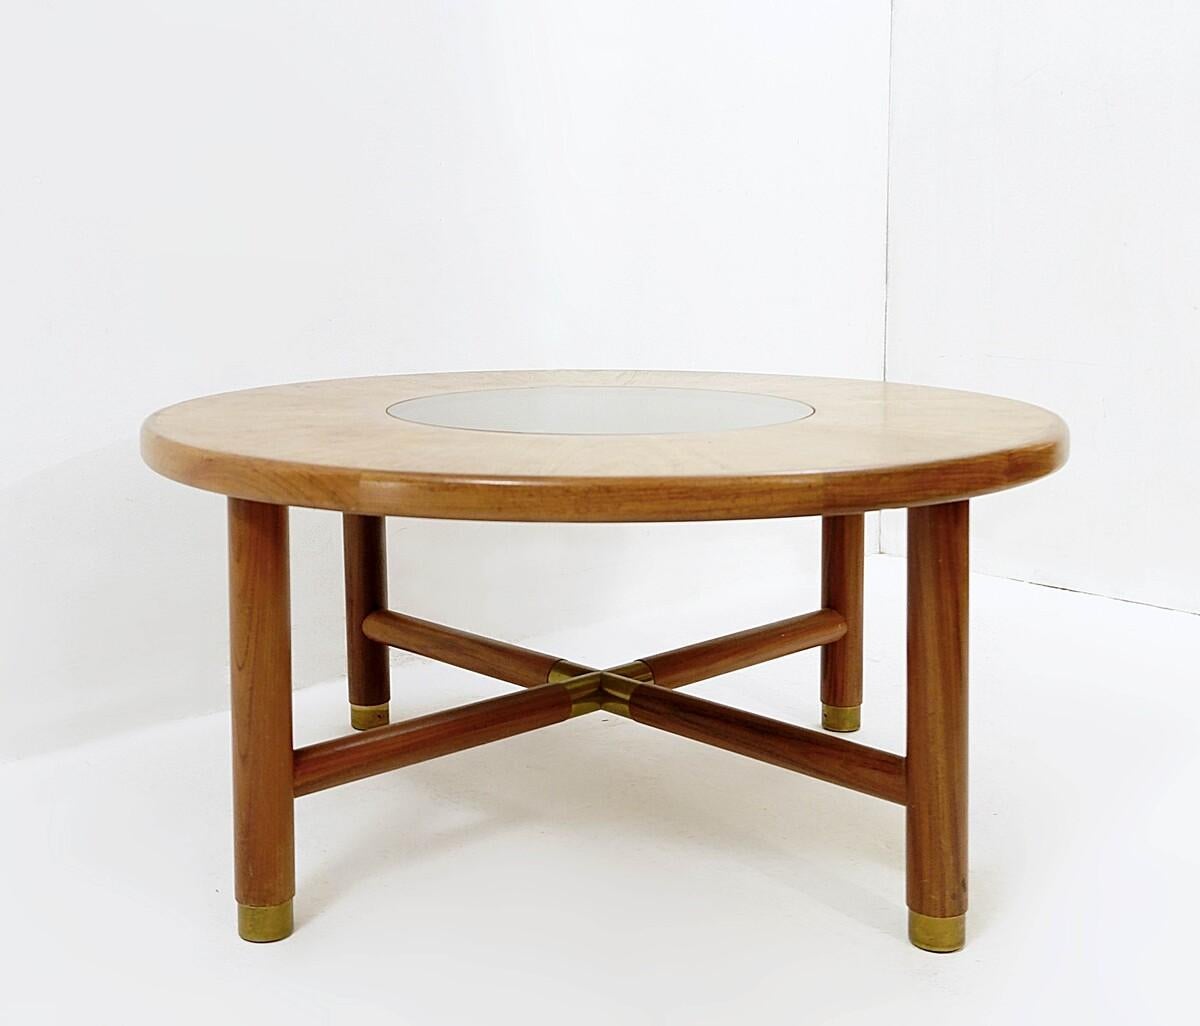 Low table by british furniture manufacturing company G-Plan known for it's high-quality, modernist furniture.